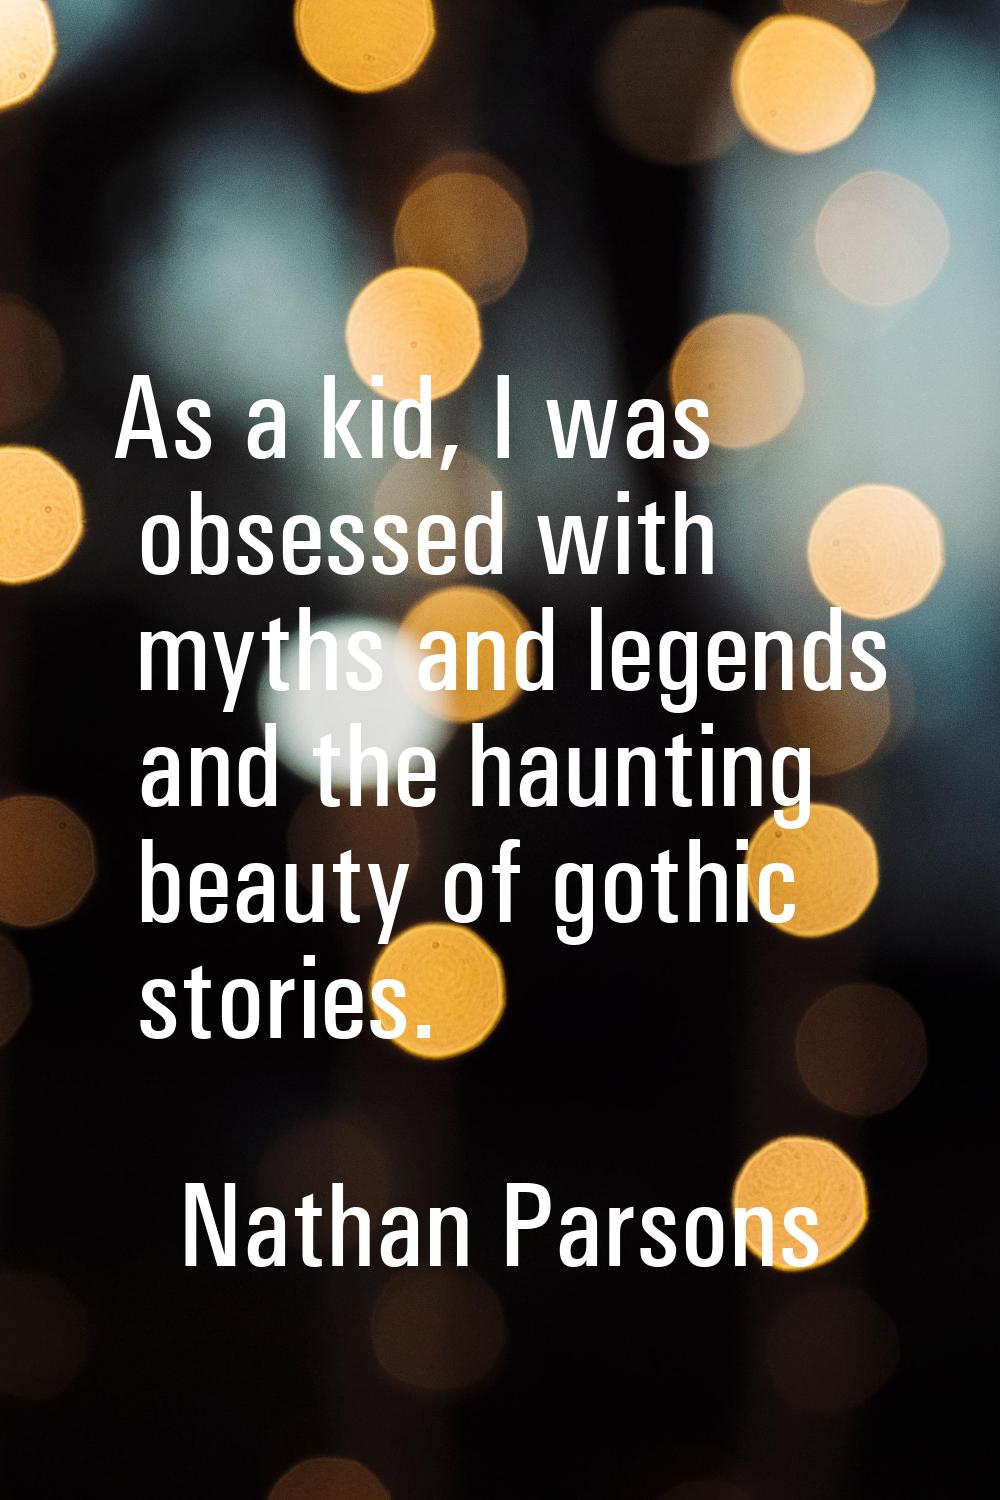 As a kid, I was obsessed with myths and legends and the haunting beauty of gothic stories.